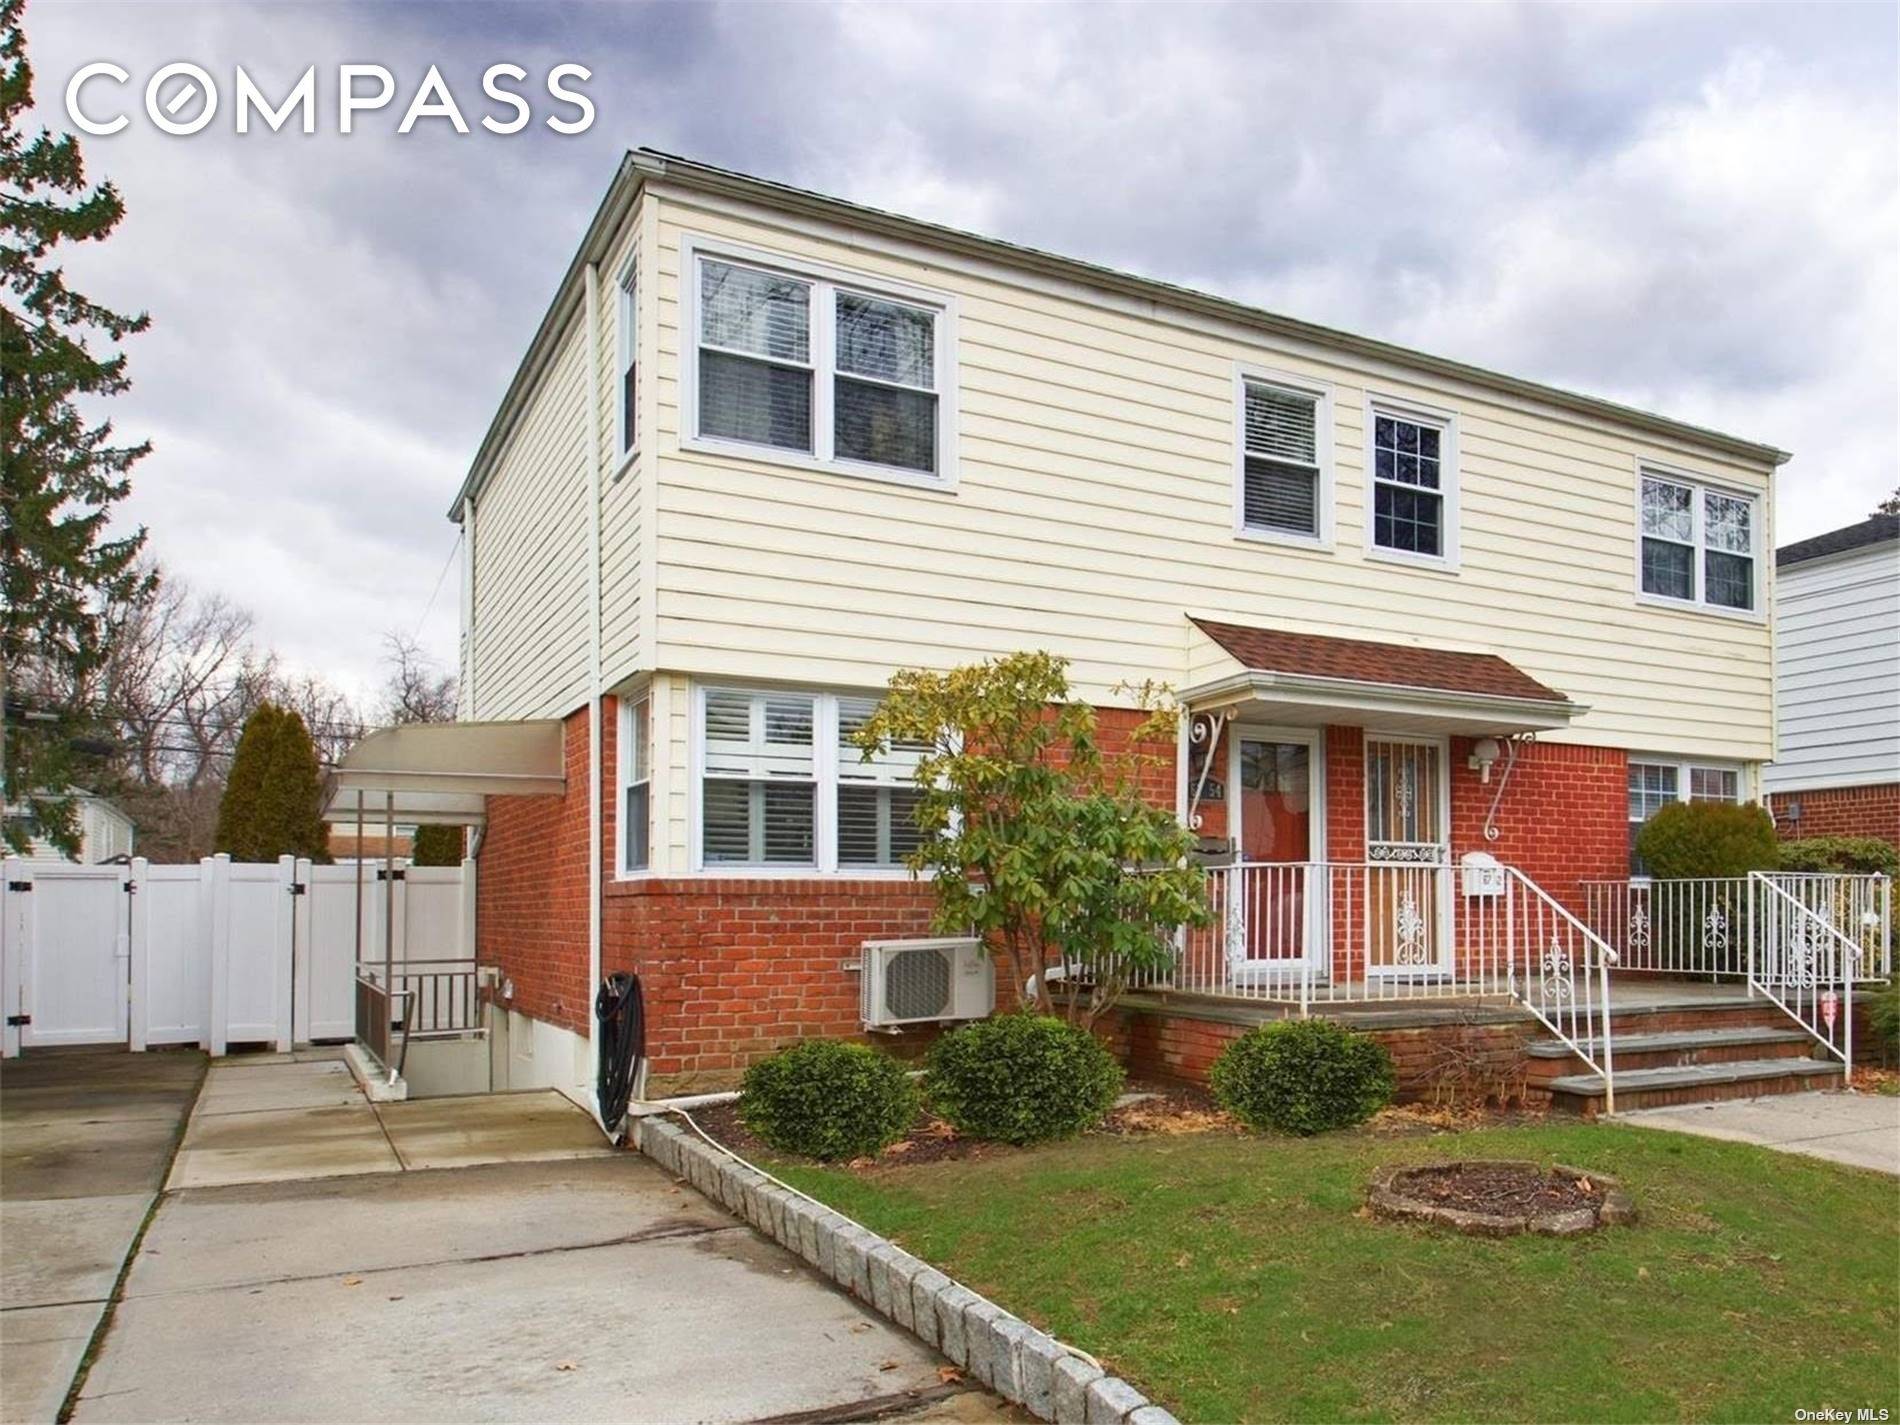 NEW TO MARKET ! OAKLAND GARDENS BAYSIDE MOVE IN READY 3 BEDROOM RESIDENCE WITH PRIVATE YARD Sunny living room, entry foyer with closet, Open windowed eat in kitchen with modern ...